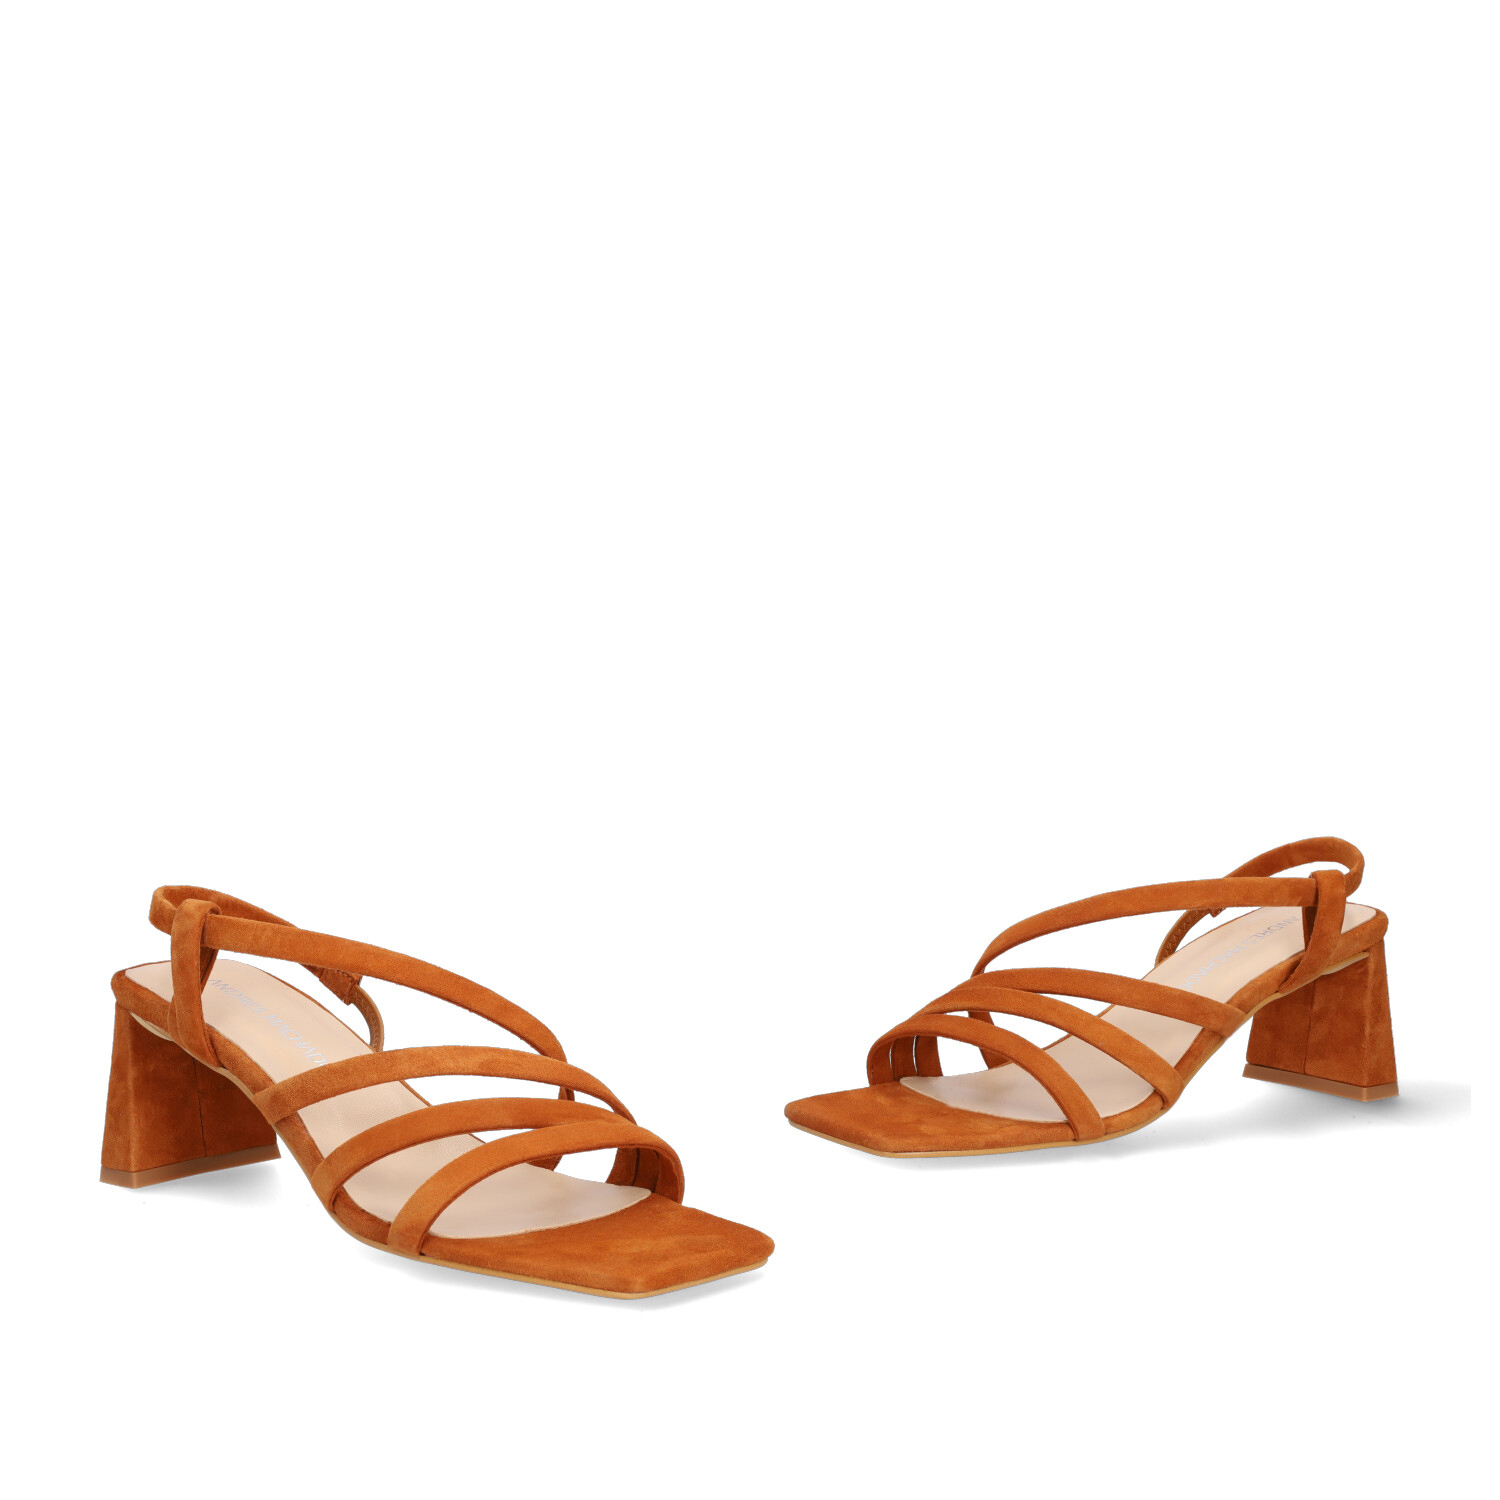 Strapped Sandals in Brown Split Leather and Square Toe 